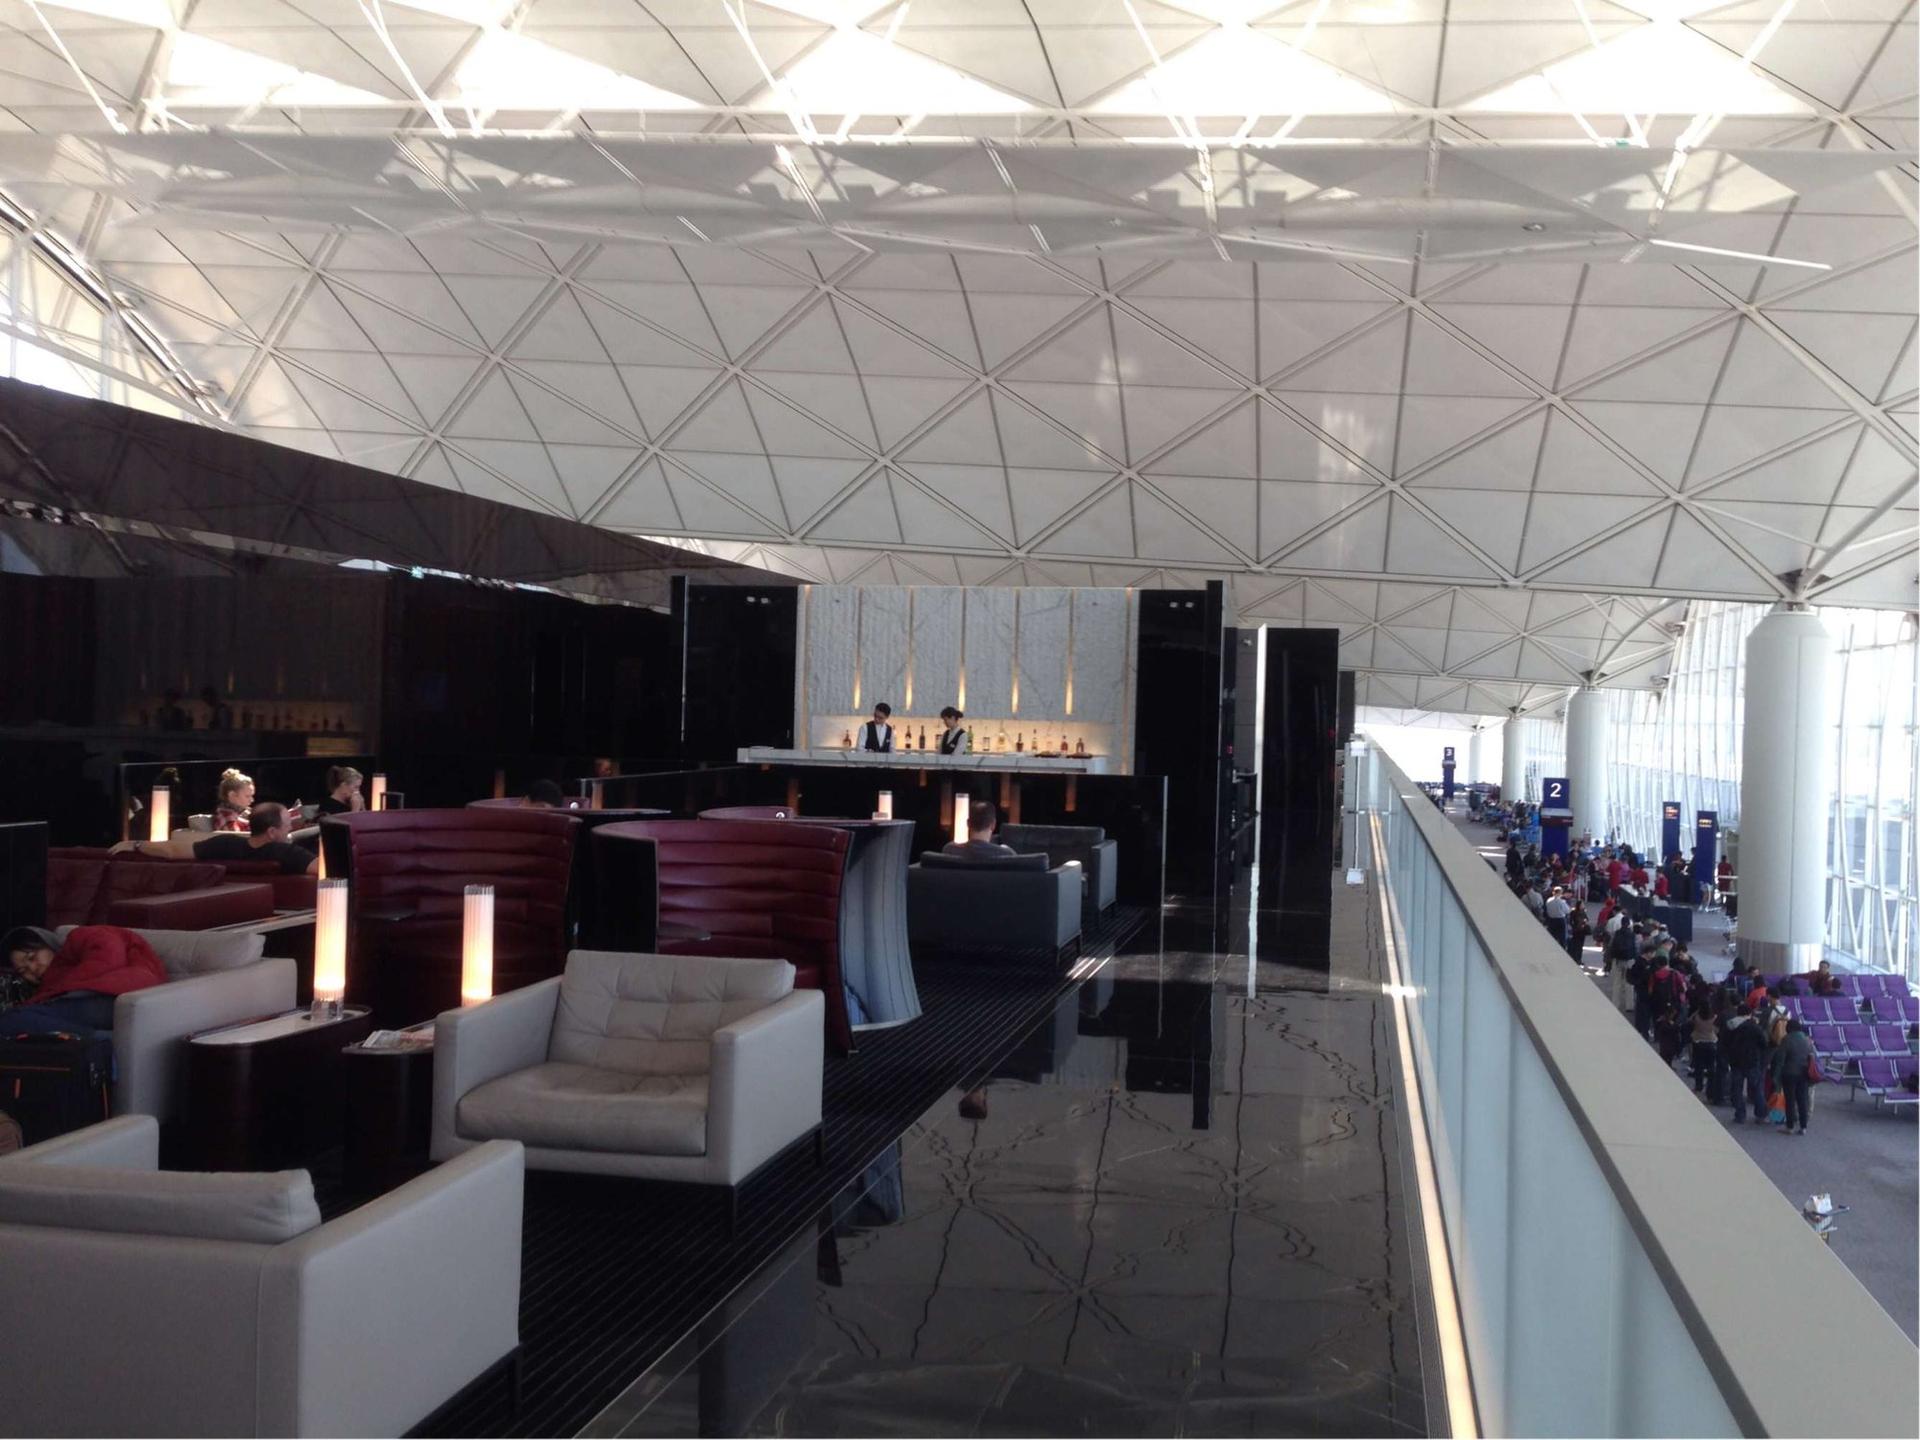 Cathay Pacific The Wing First Class Lounge image 35 of 89